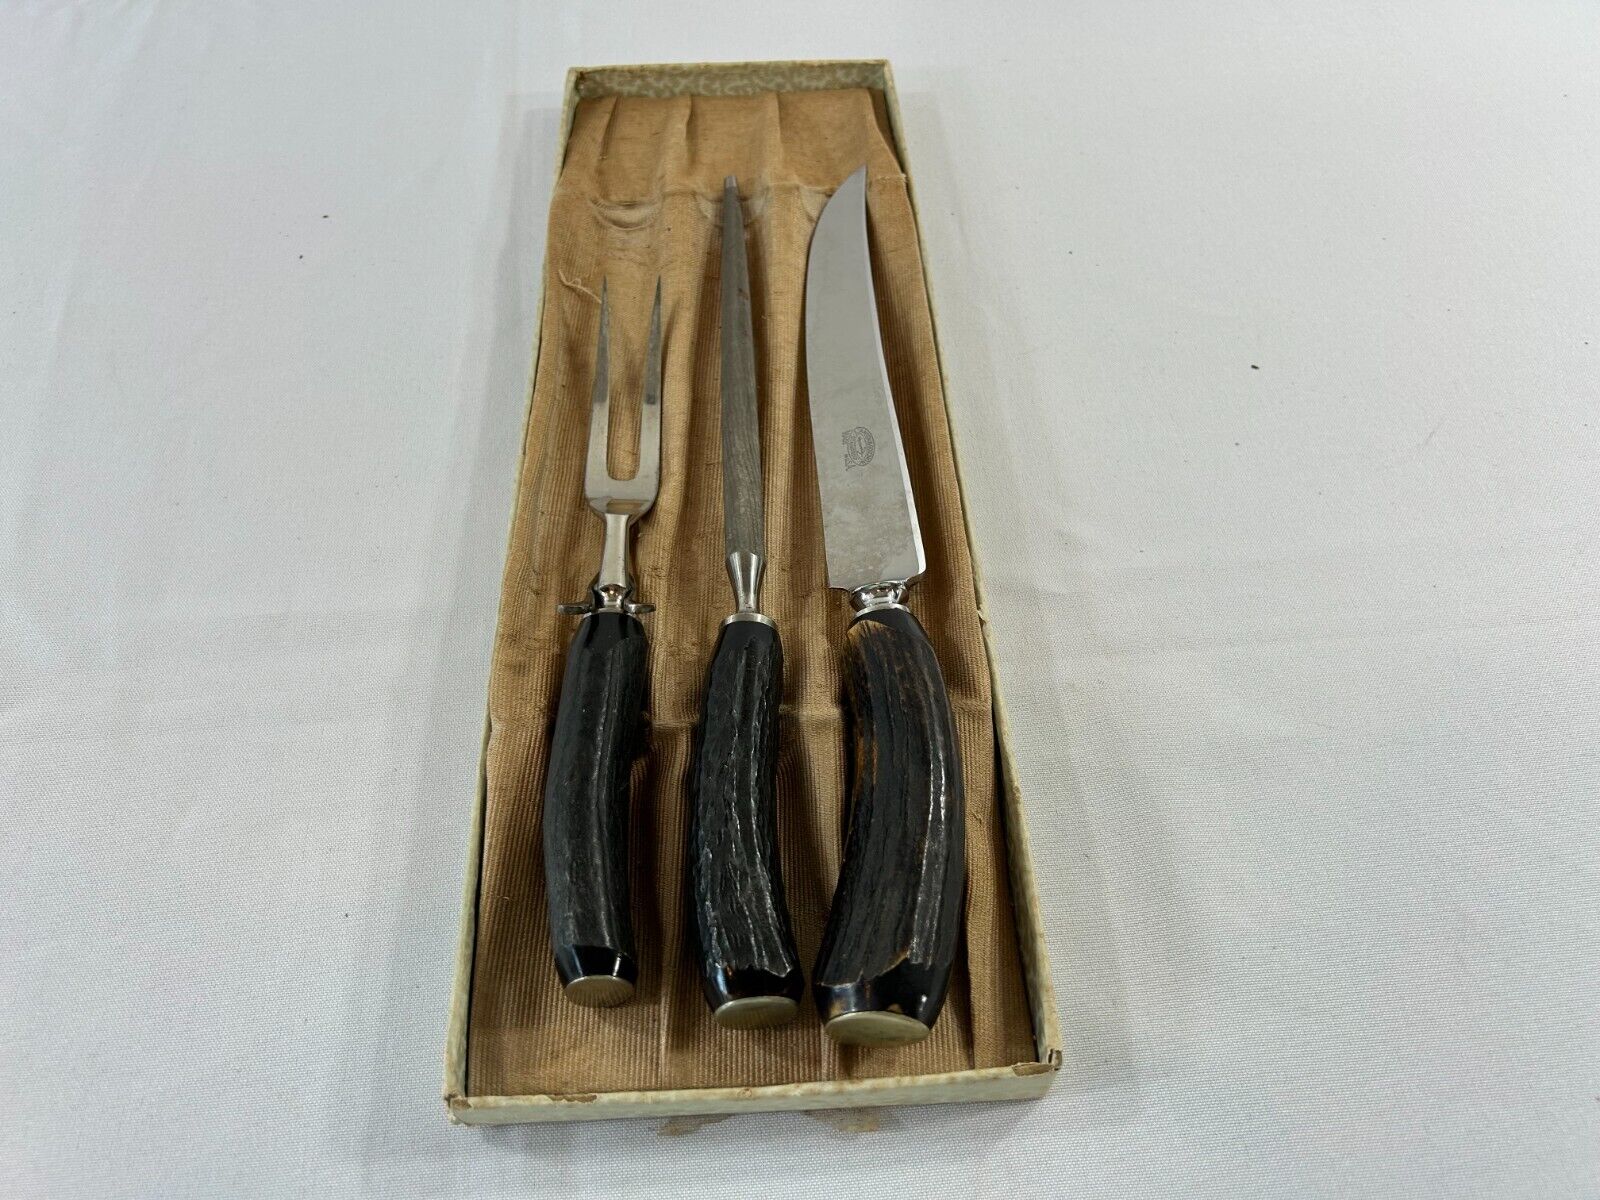 Vintage Lamson & Goodnow Carving Set - Stag Horn Handle - 3 piece set